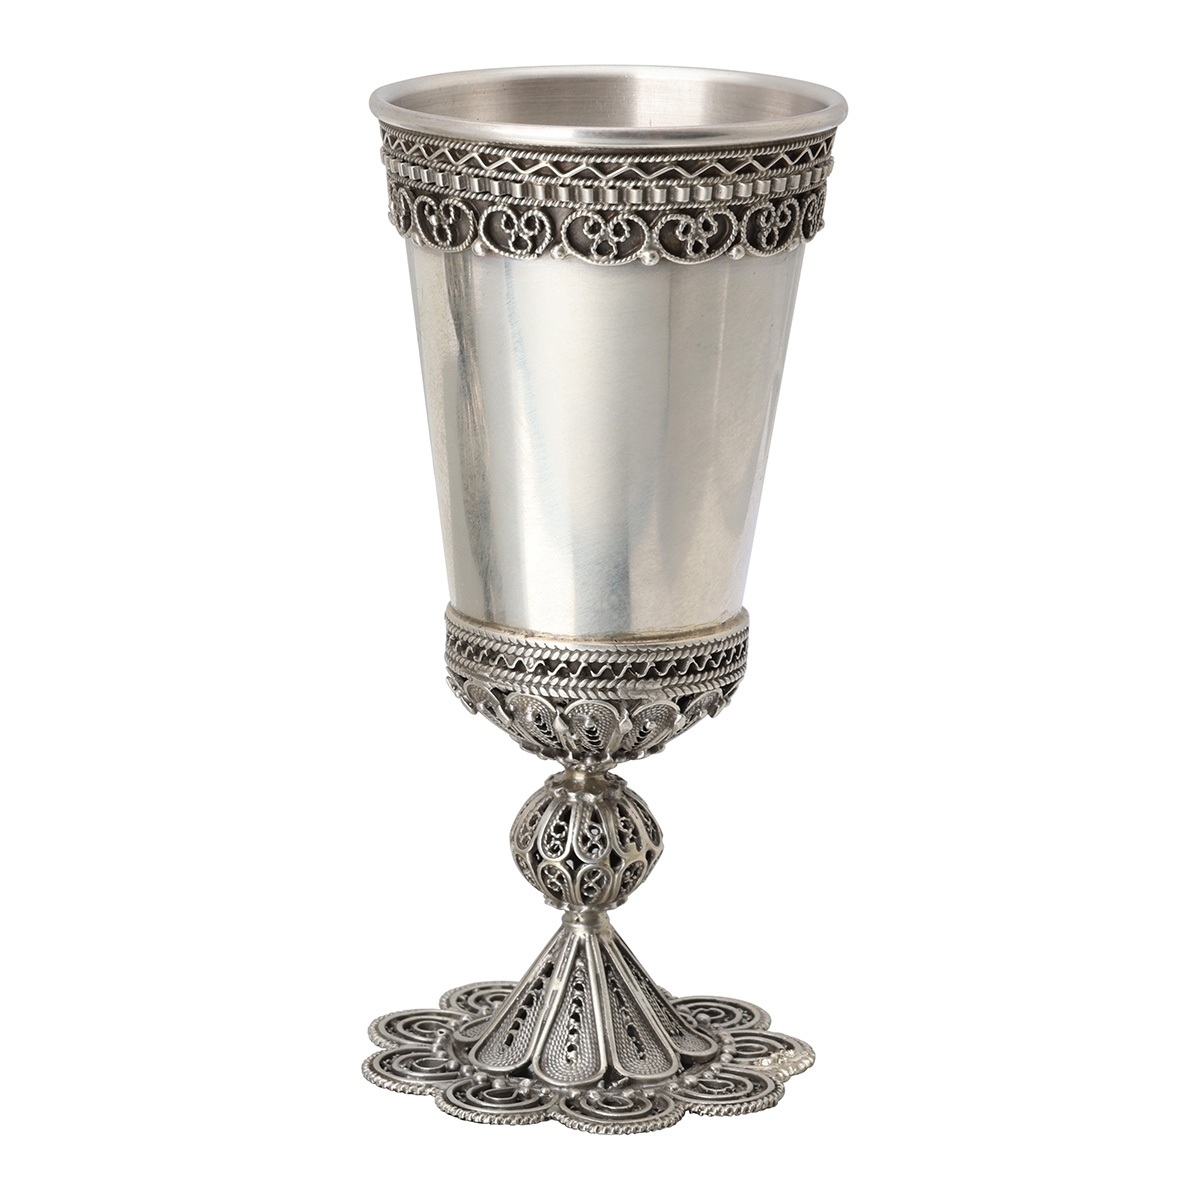 Eastern Sterling Silver Kiddush Cup with Refined Filigree Design - 1